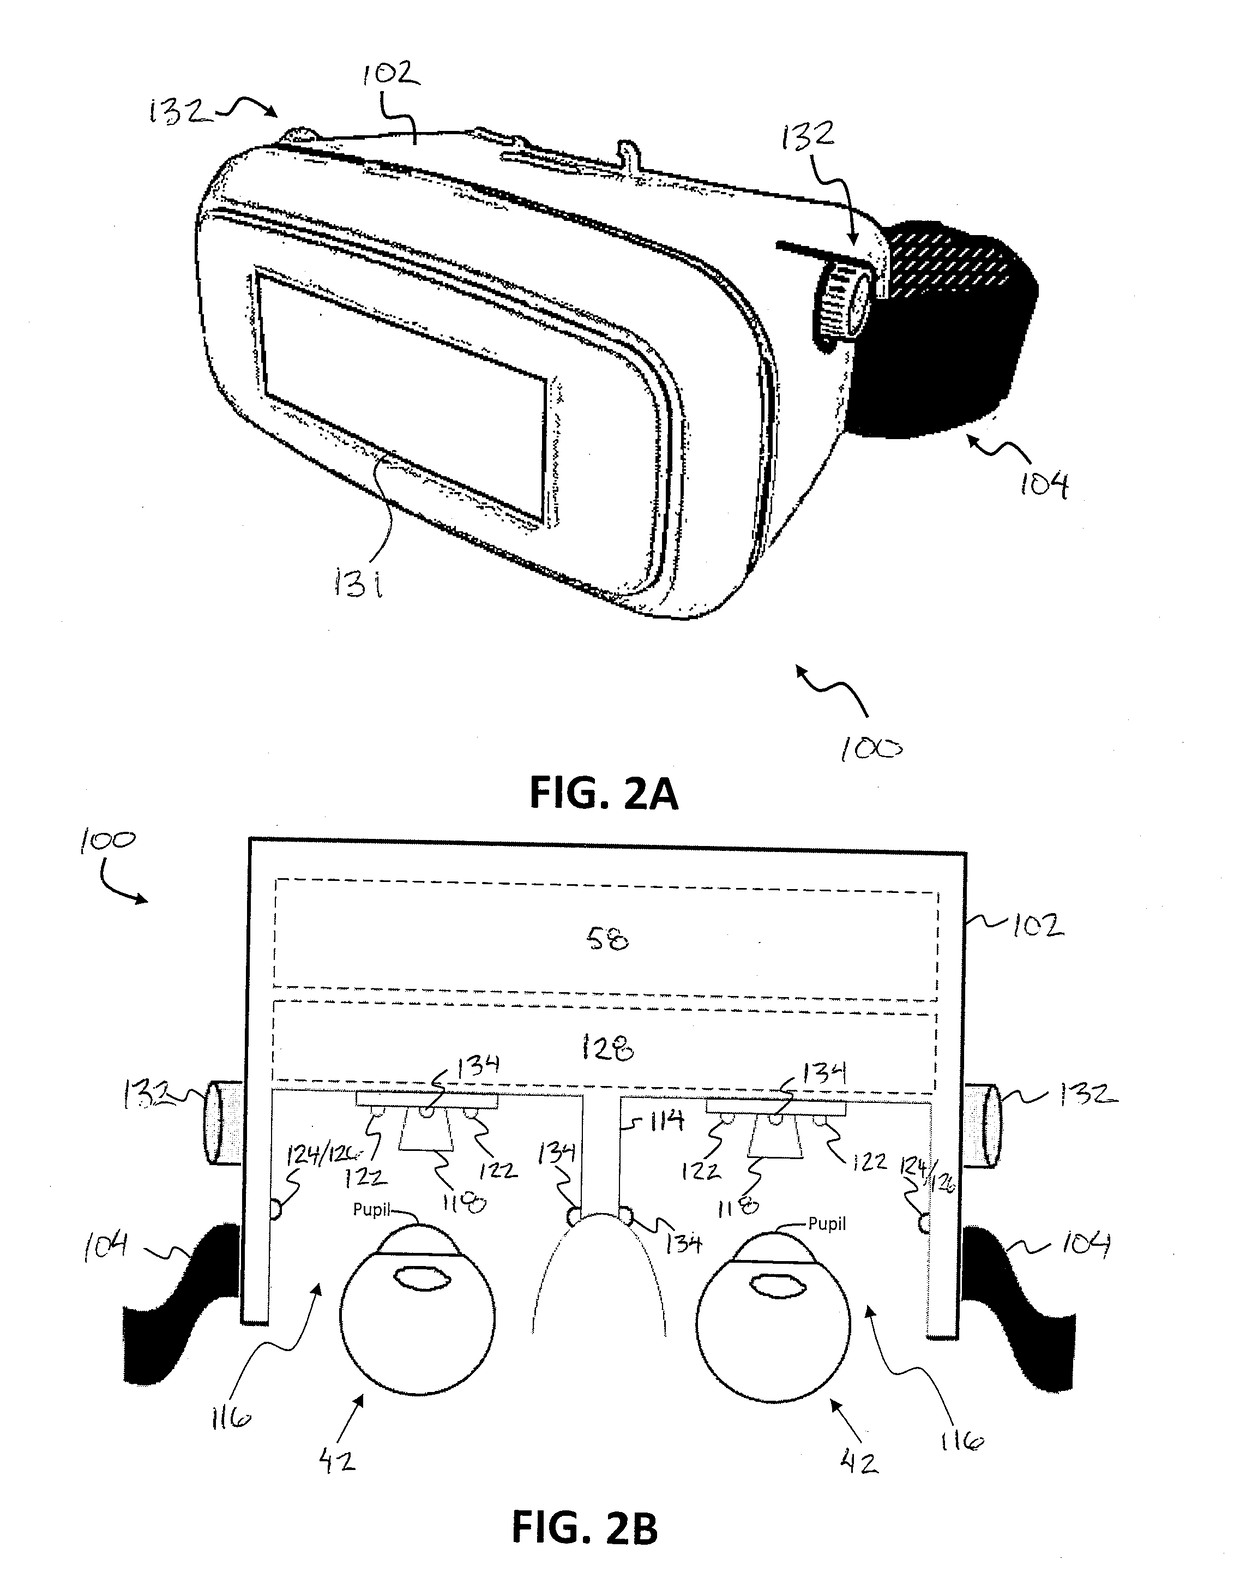 Portable ocular response testing device and methods of use